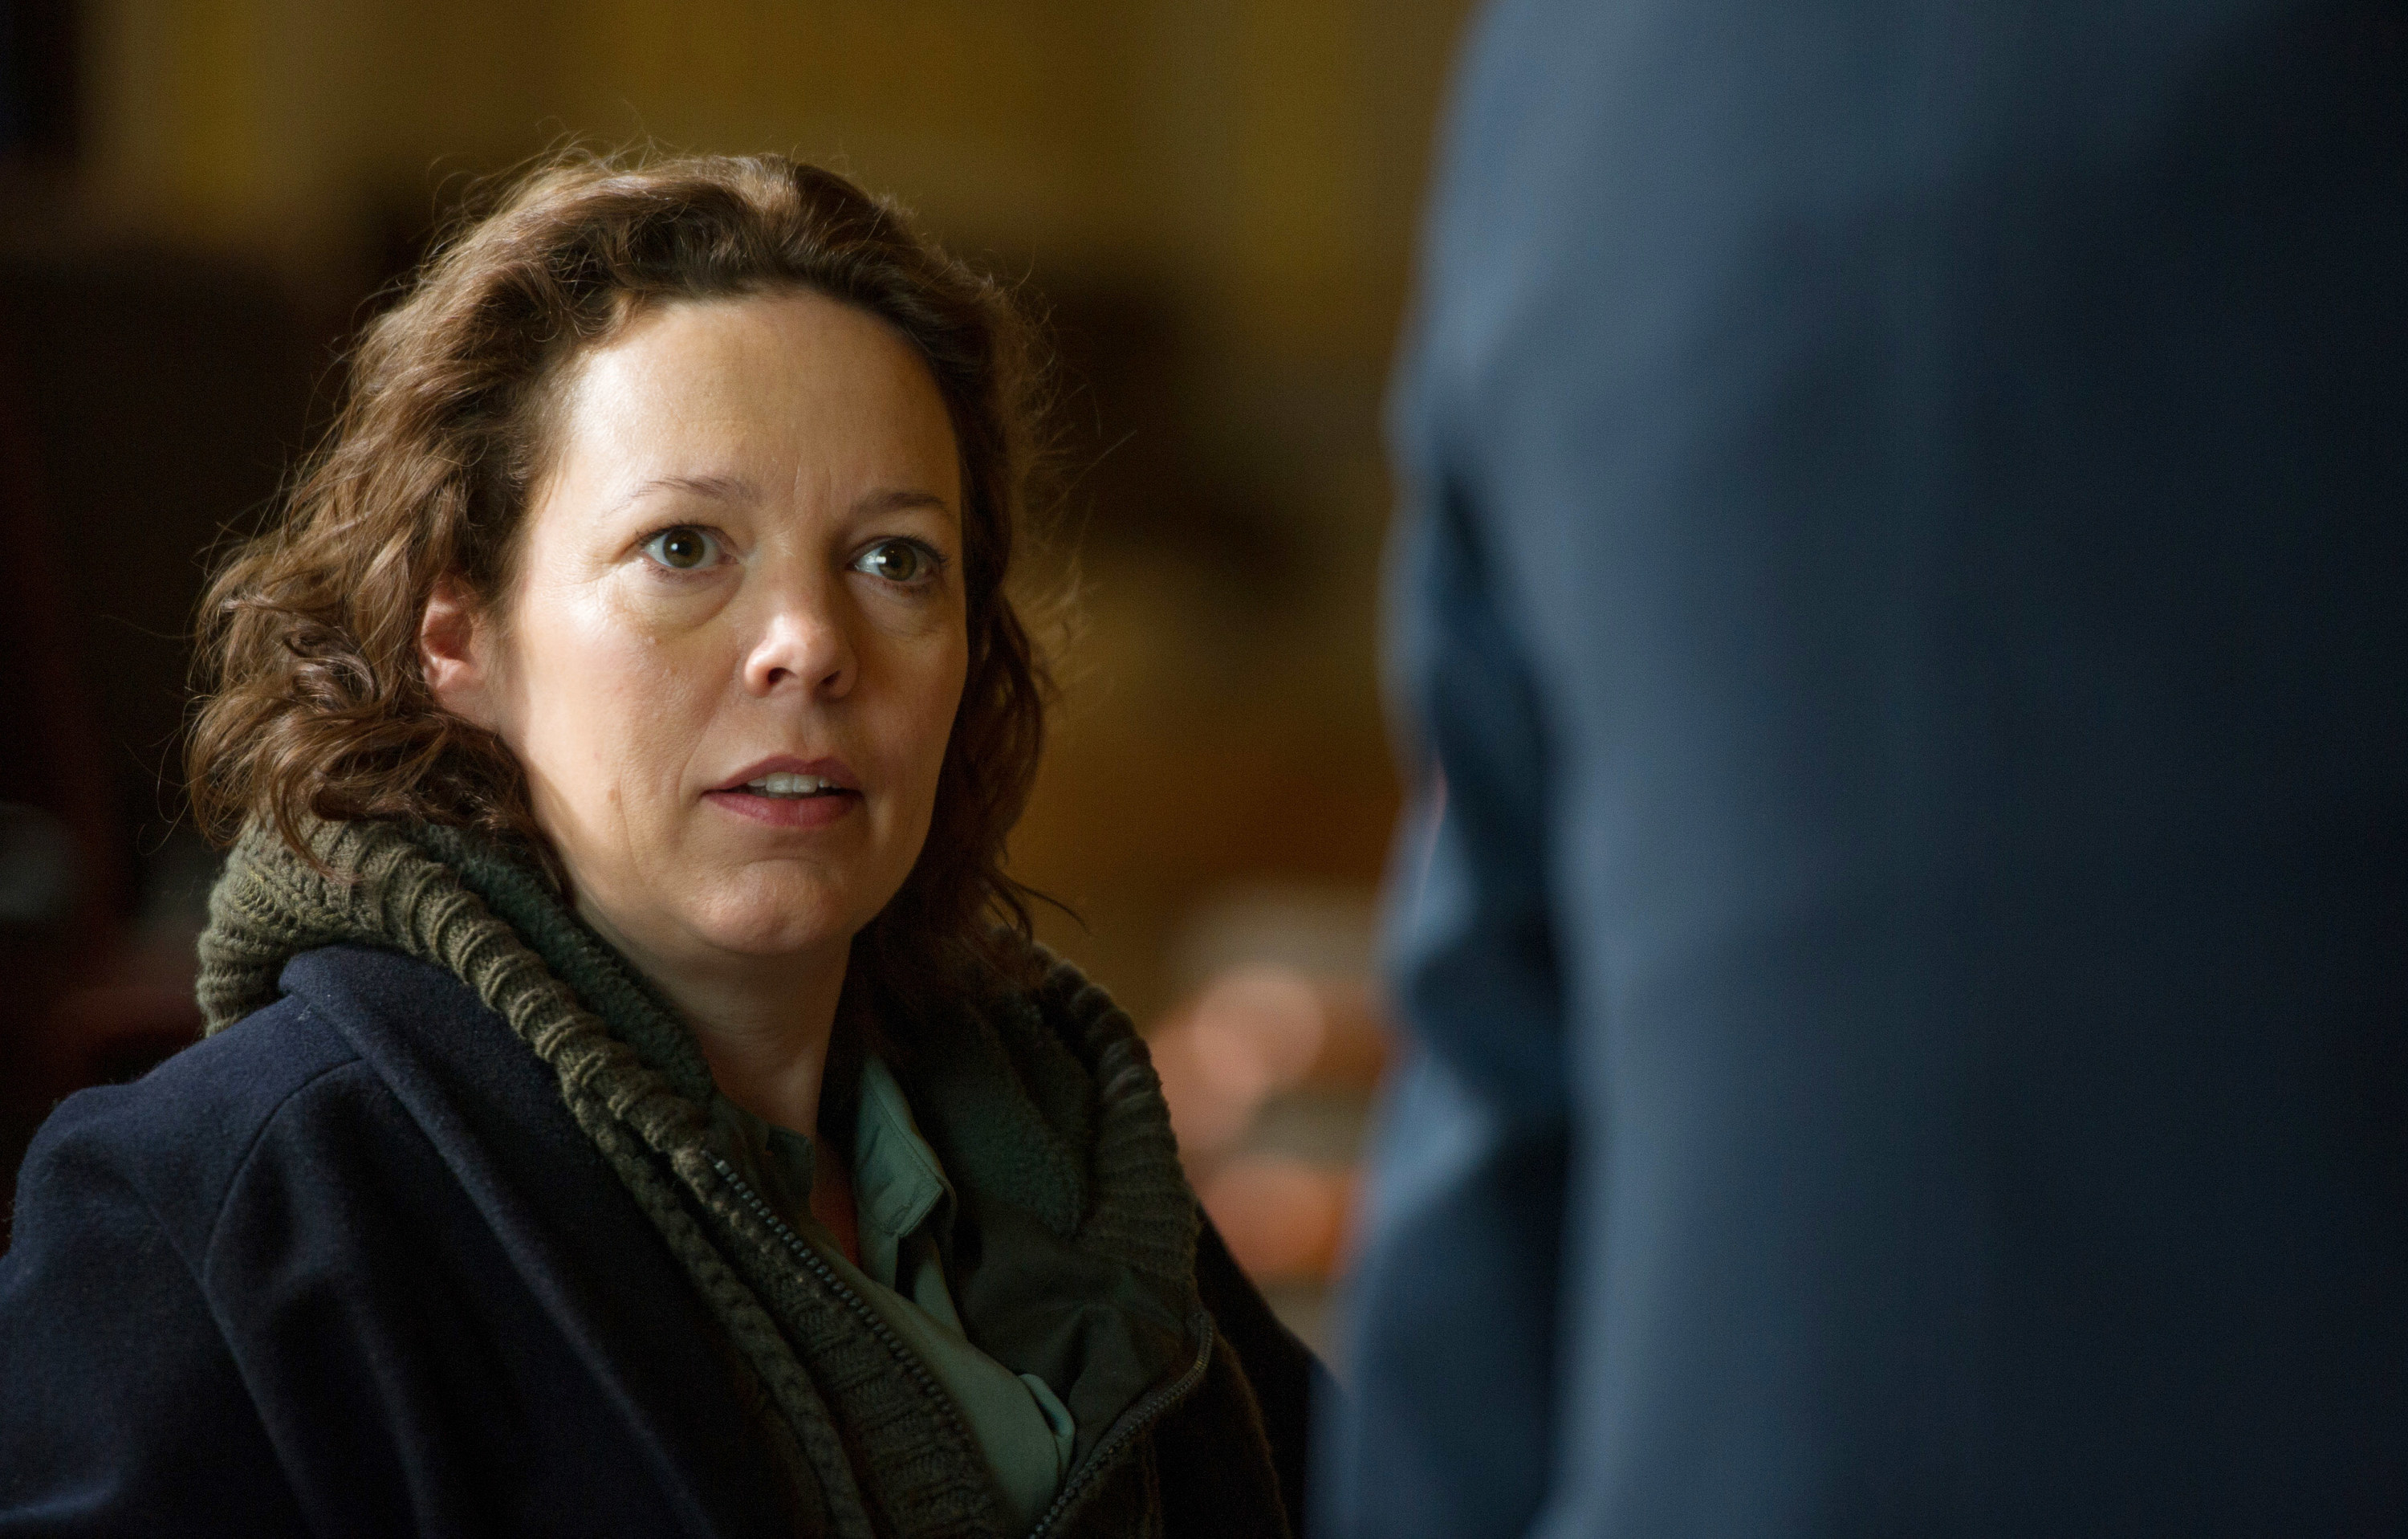 Olivia Colman sitting and looking concerned.